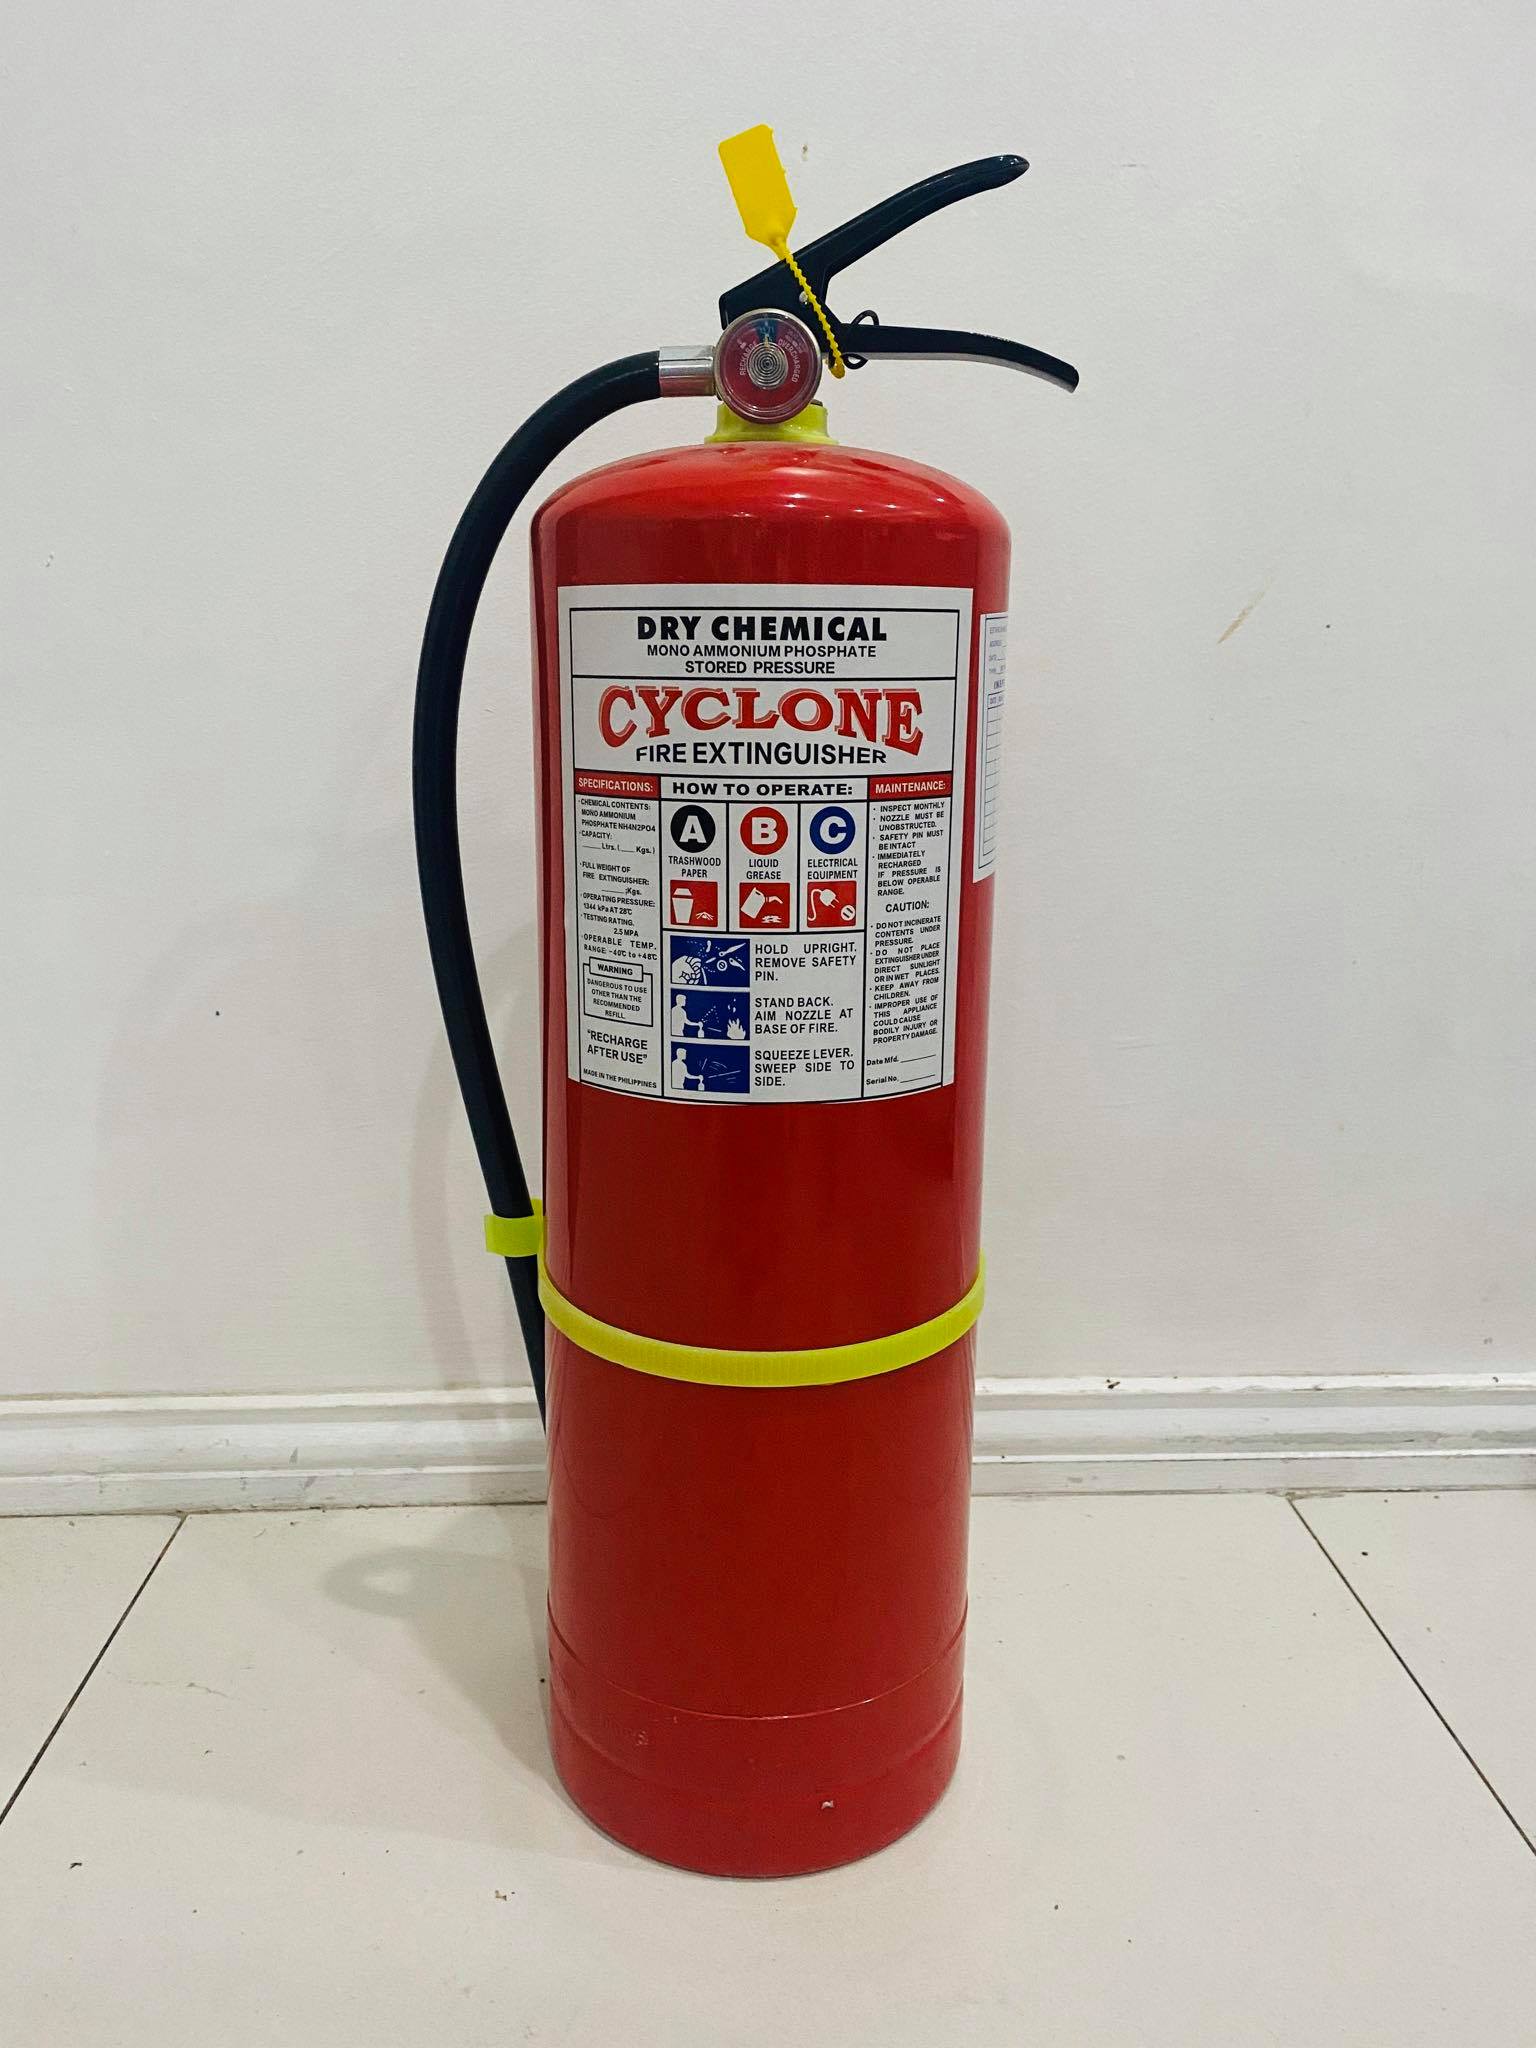 Fire Extinguisher Abc Dry Chemical 20lbs Fire Extinguisher 20 Lbs Brand Cyclone Free Wall 6857